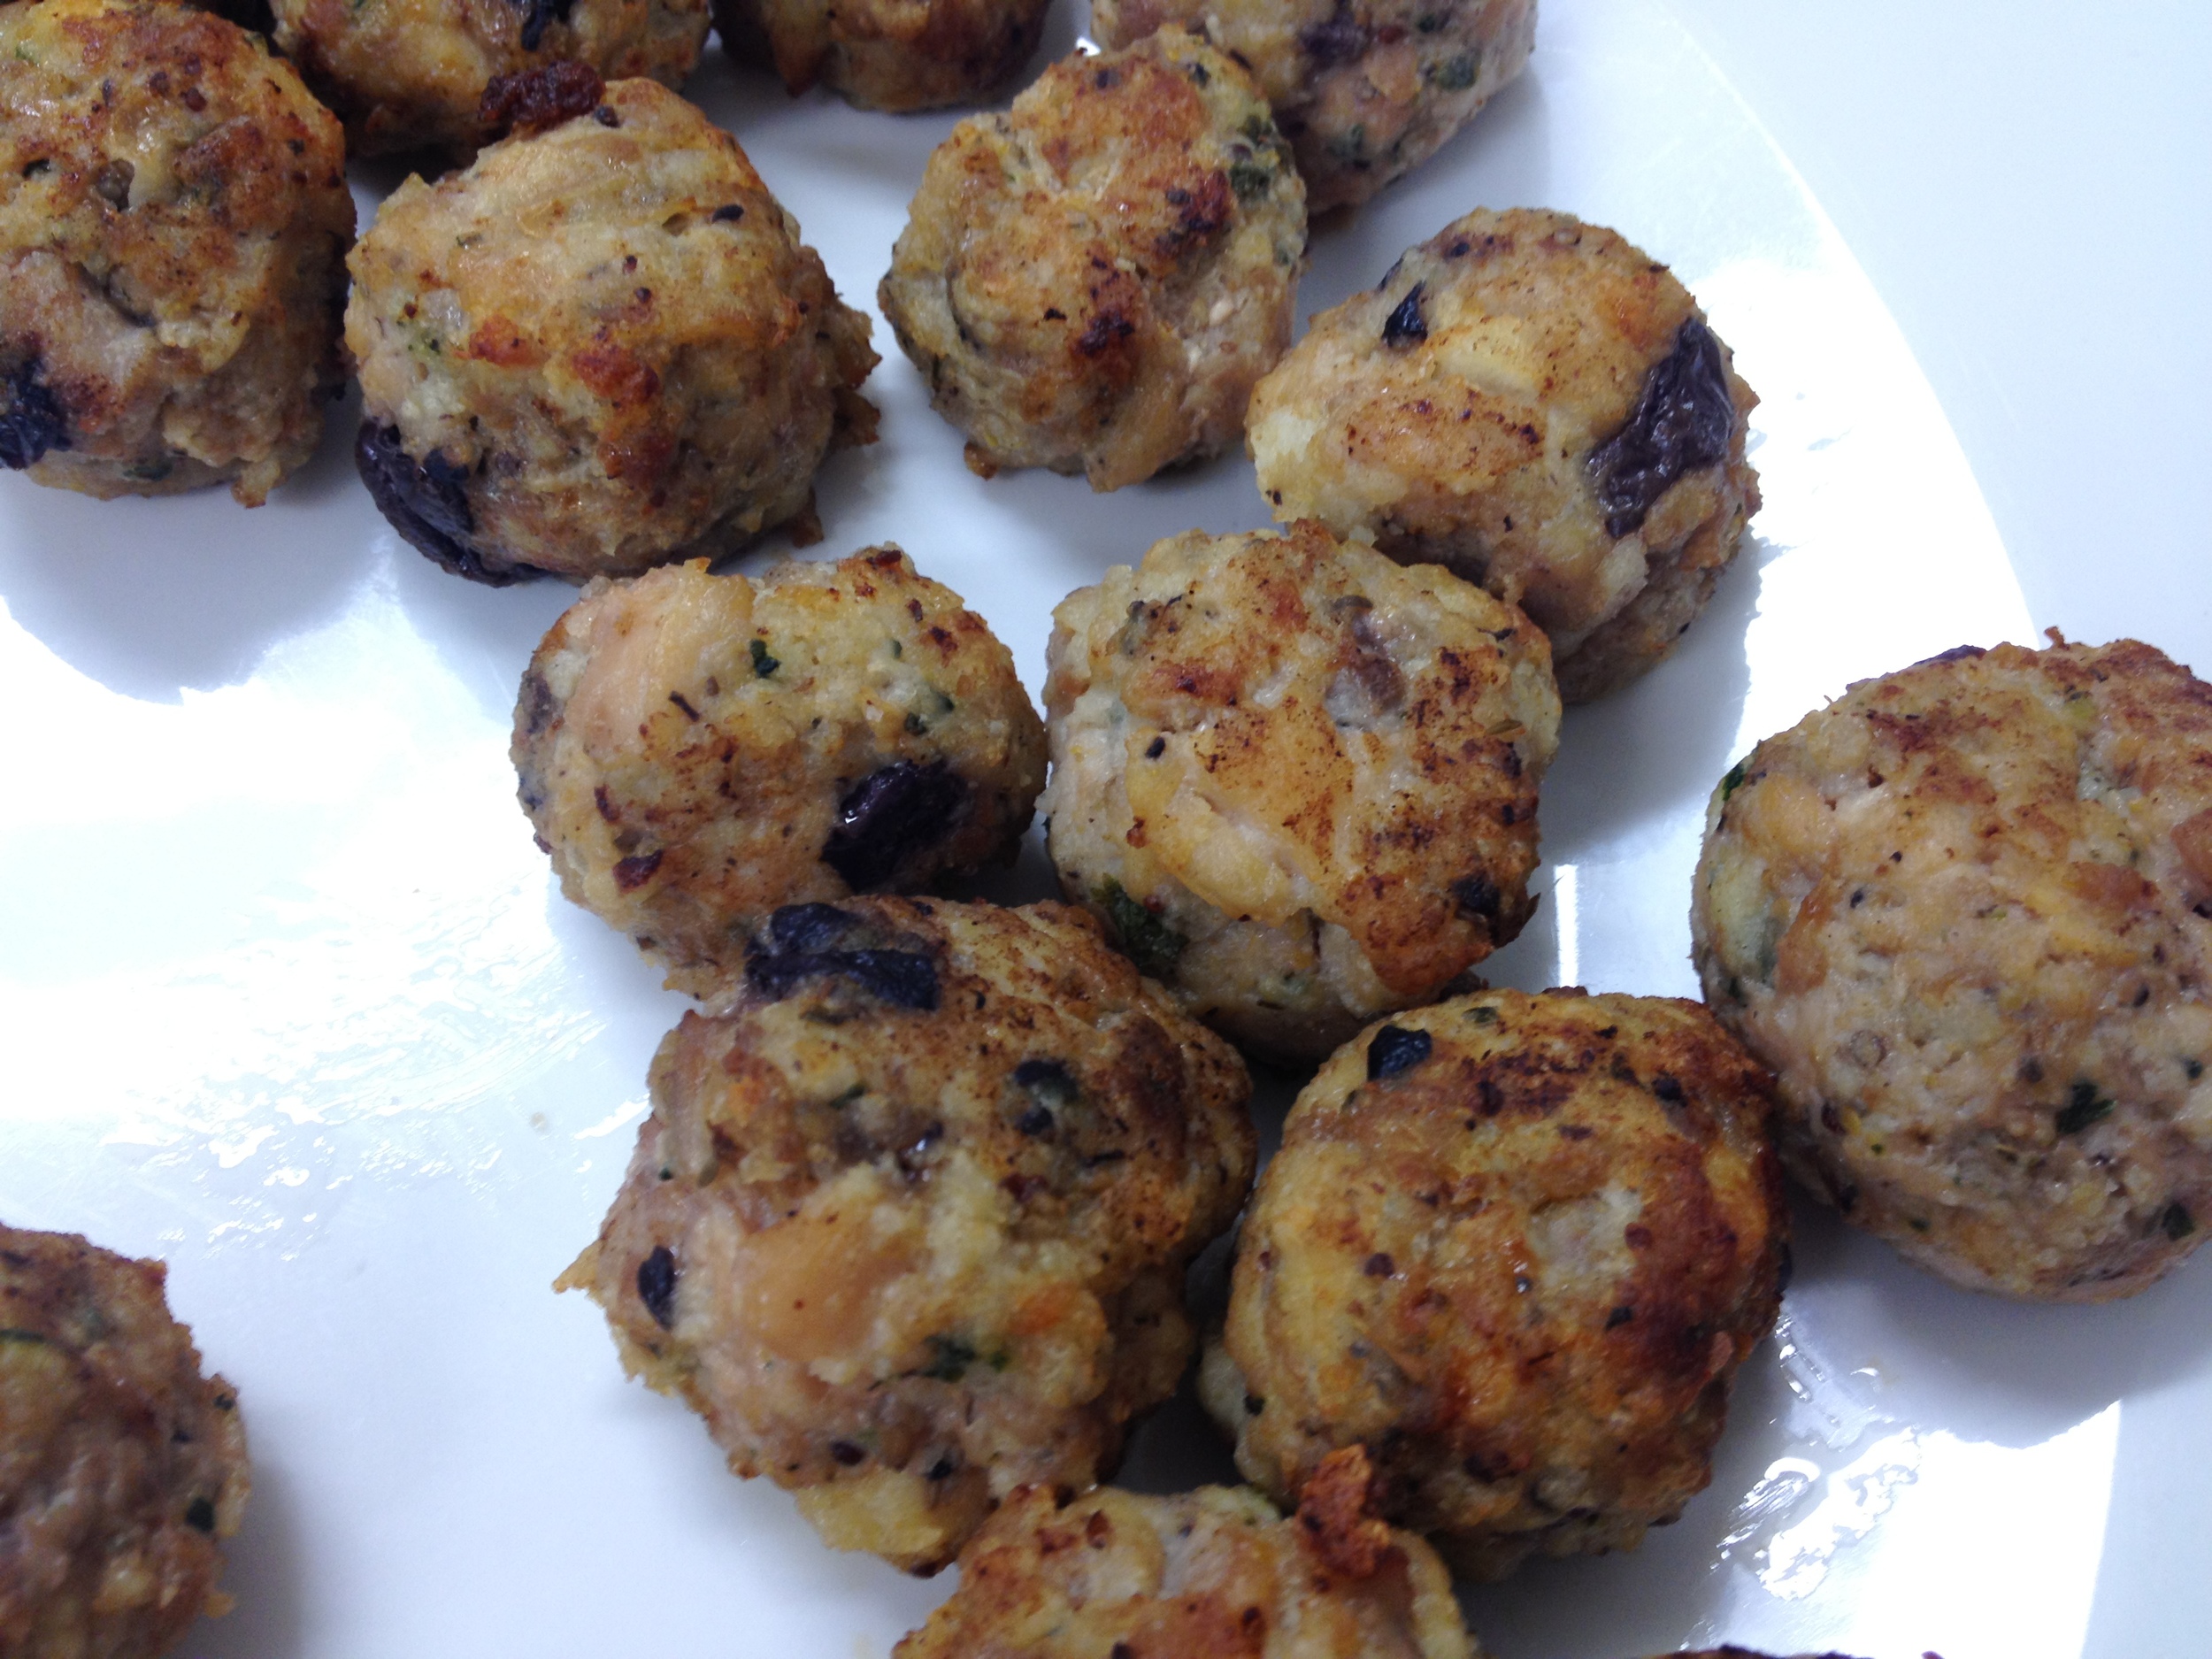  Chicken &amp; Kalamata Olive balls | &nbsp;Catering by Gipps St Deli 